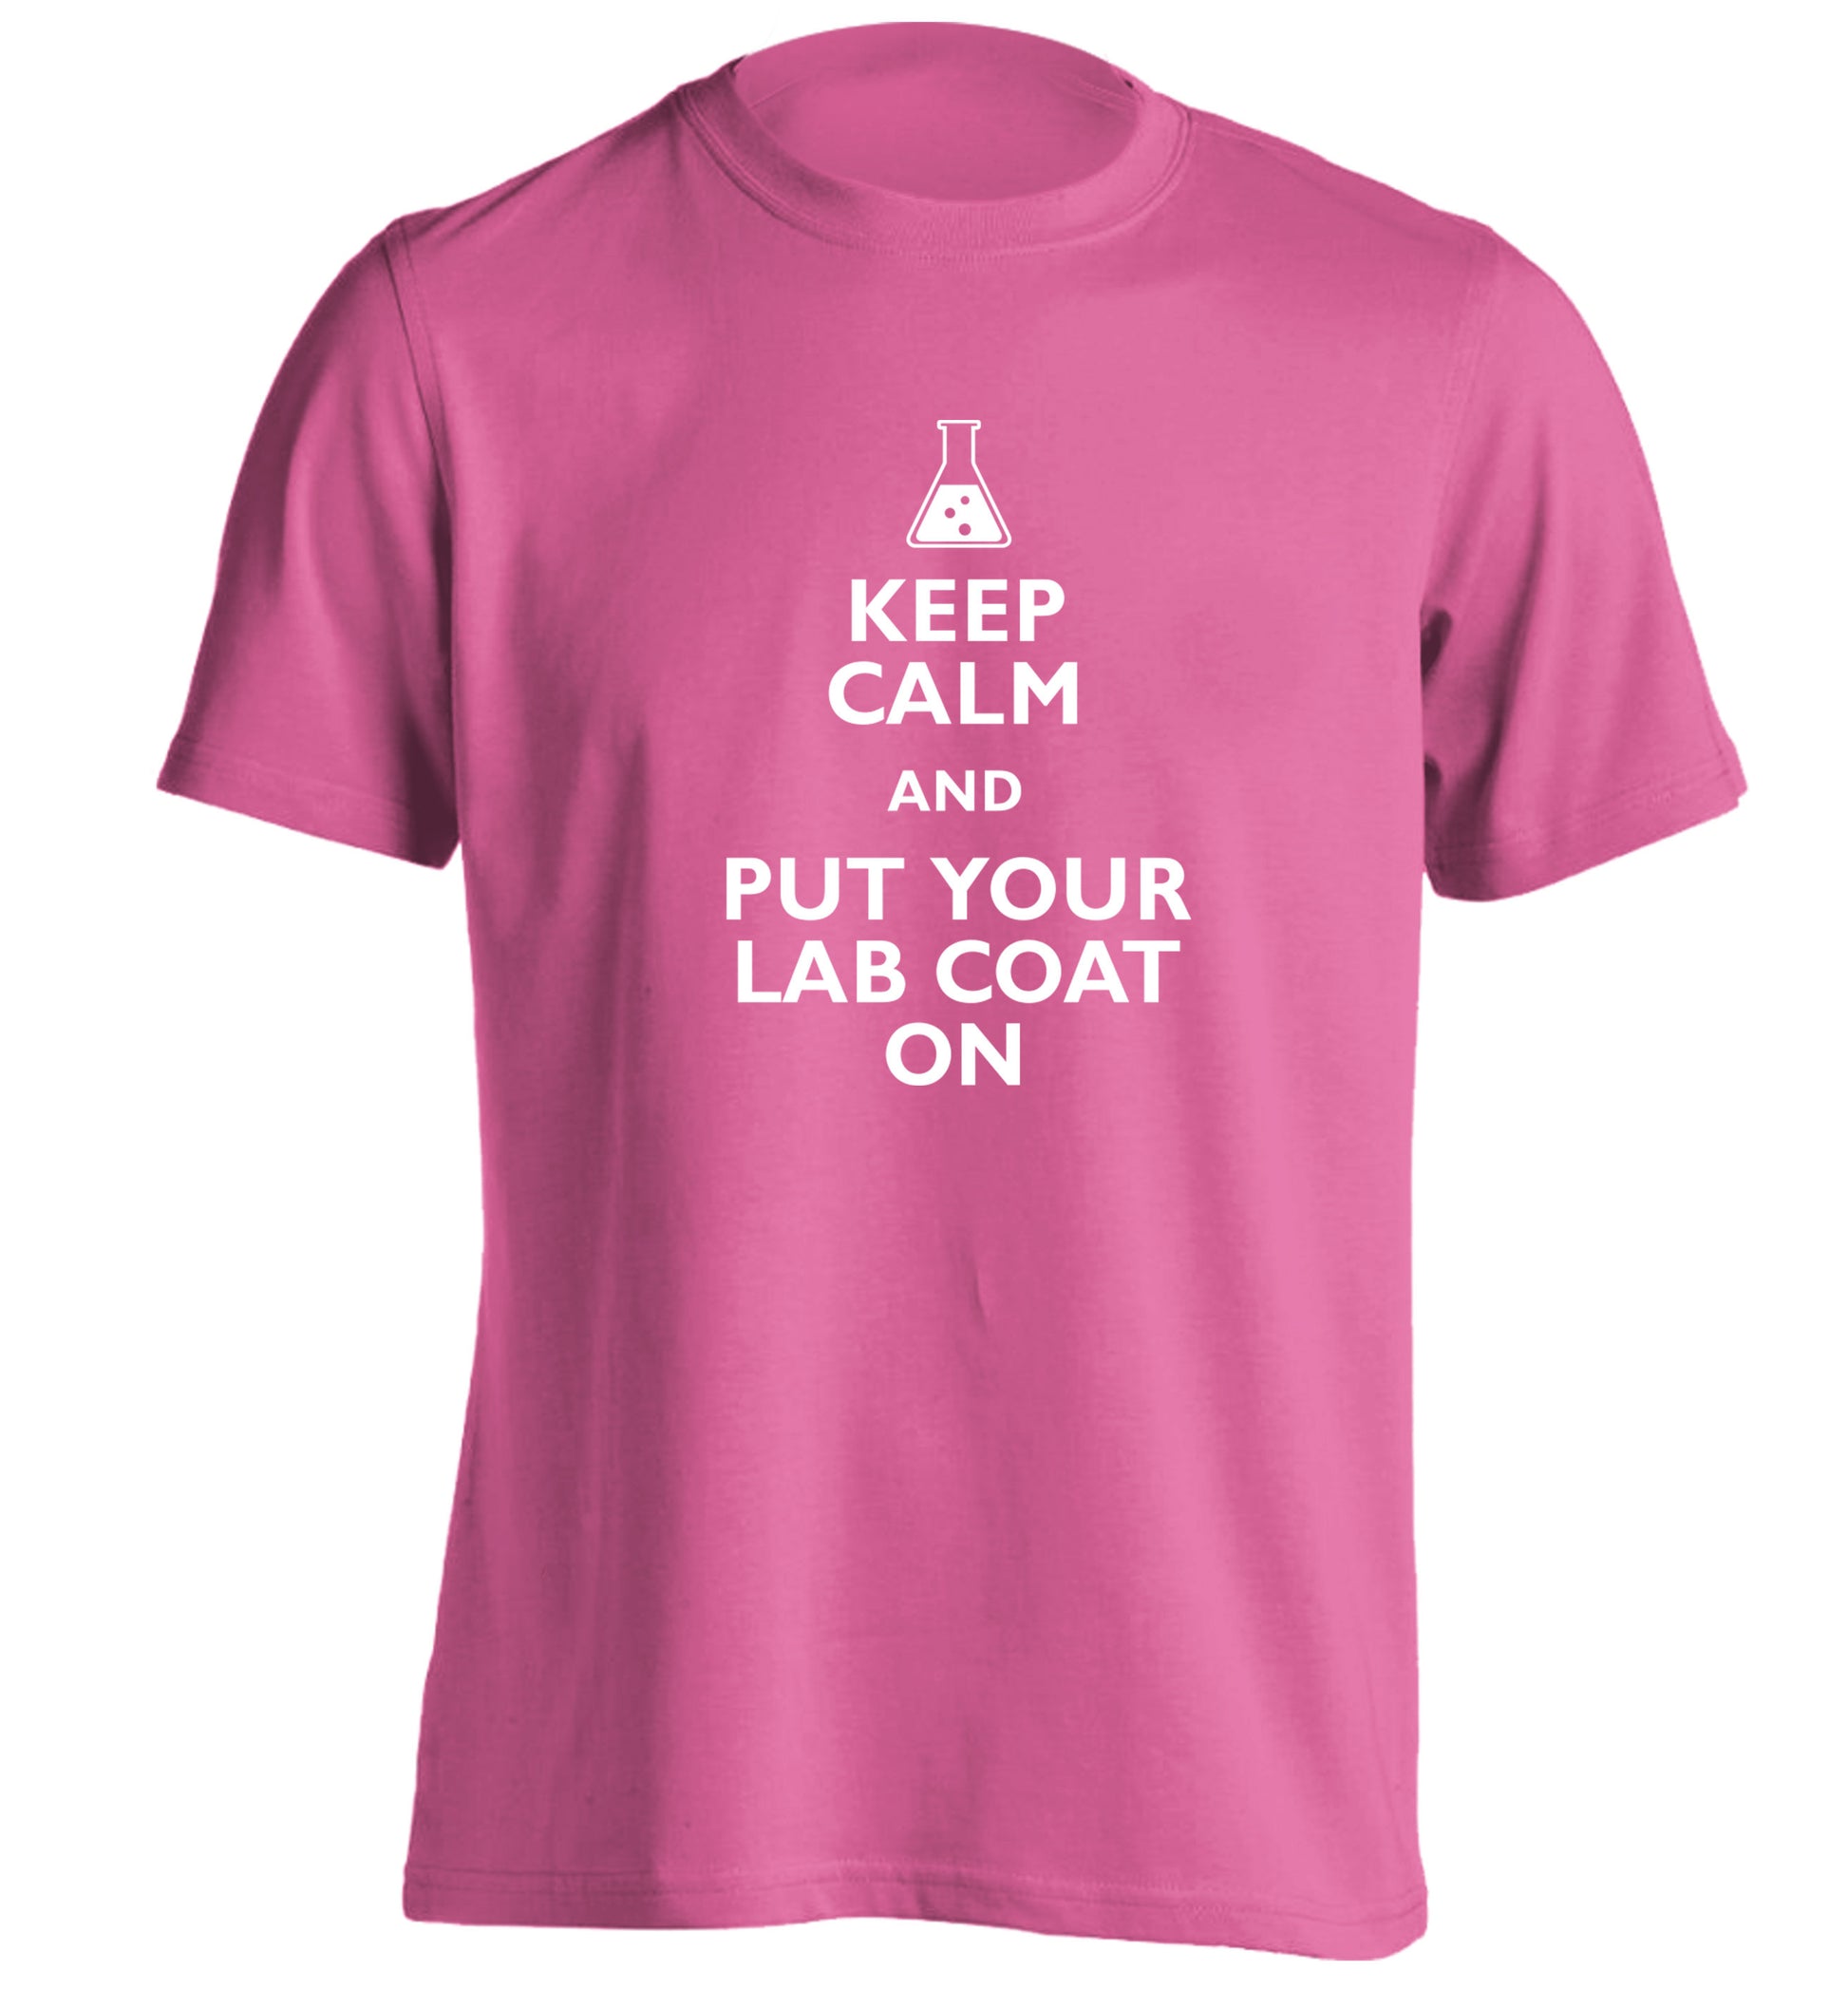 Keep calm and put your lab coat on adults unisex pink Tshirt 2XL